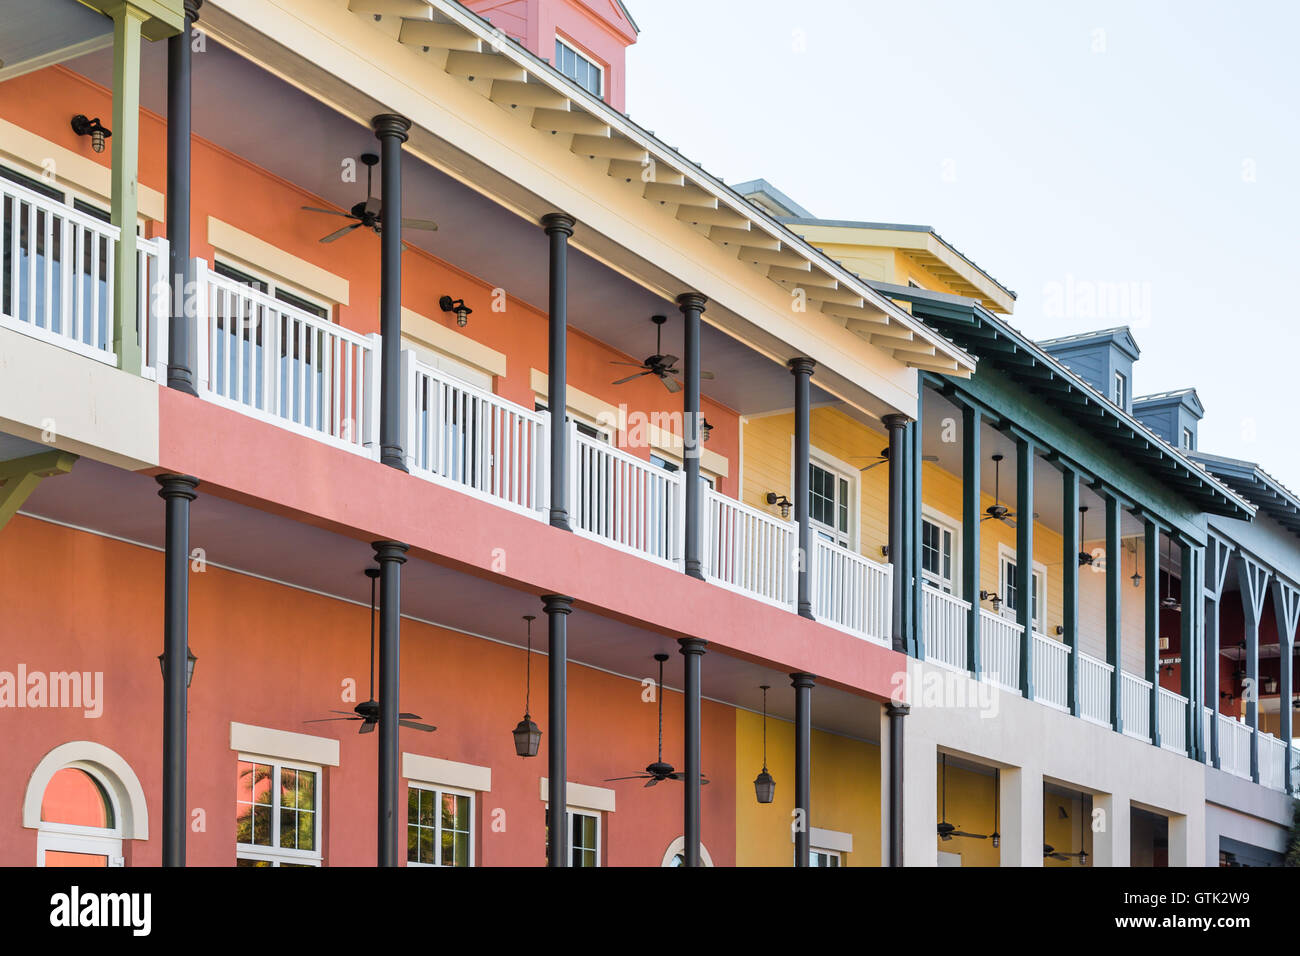 Many Fans on Colorful Balconies Stock Photo